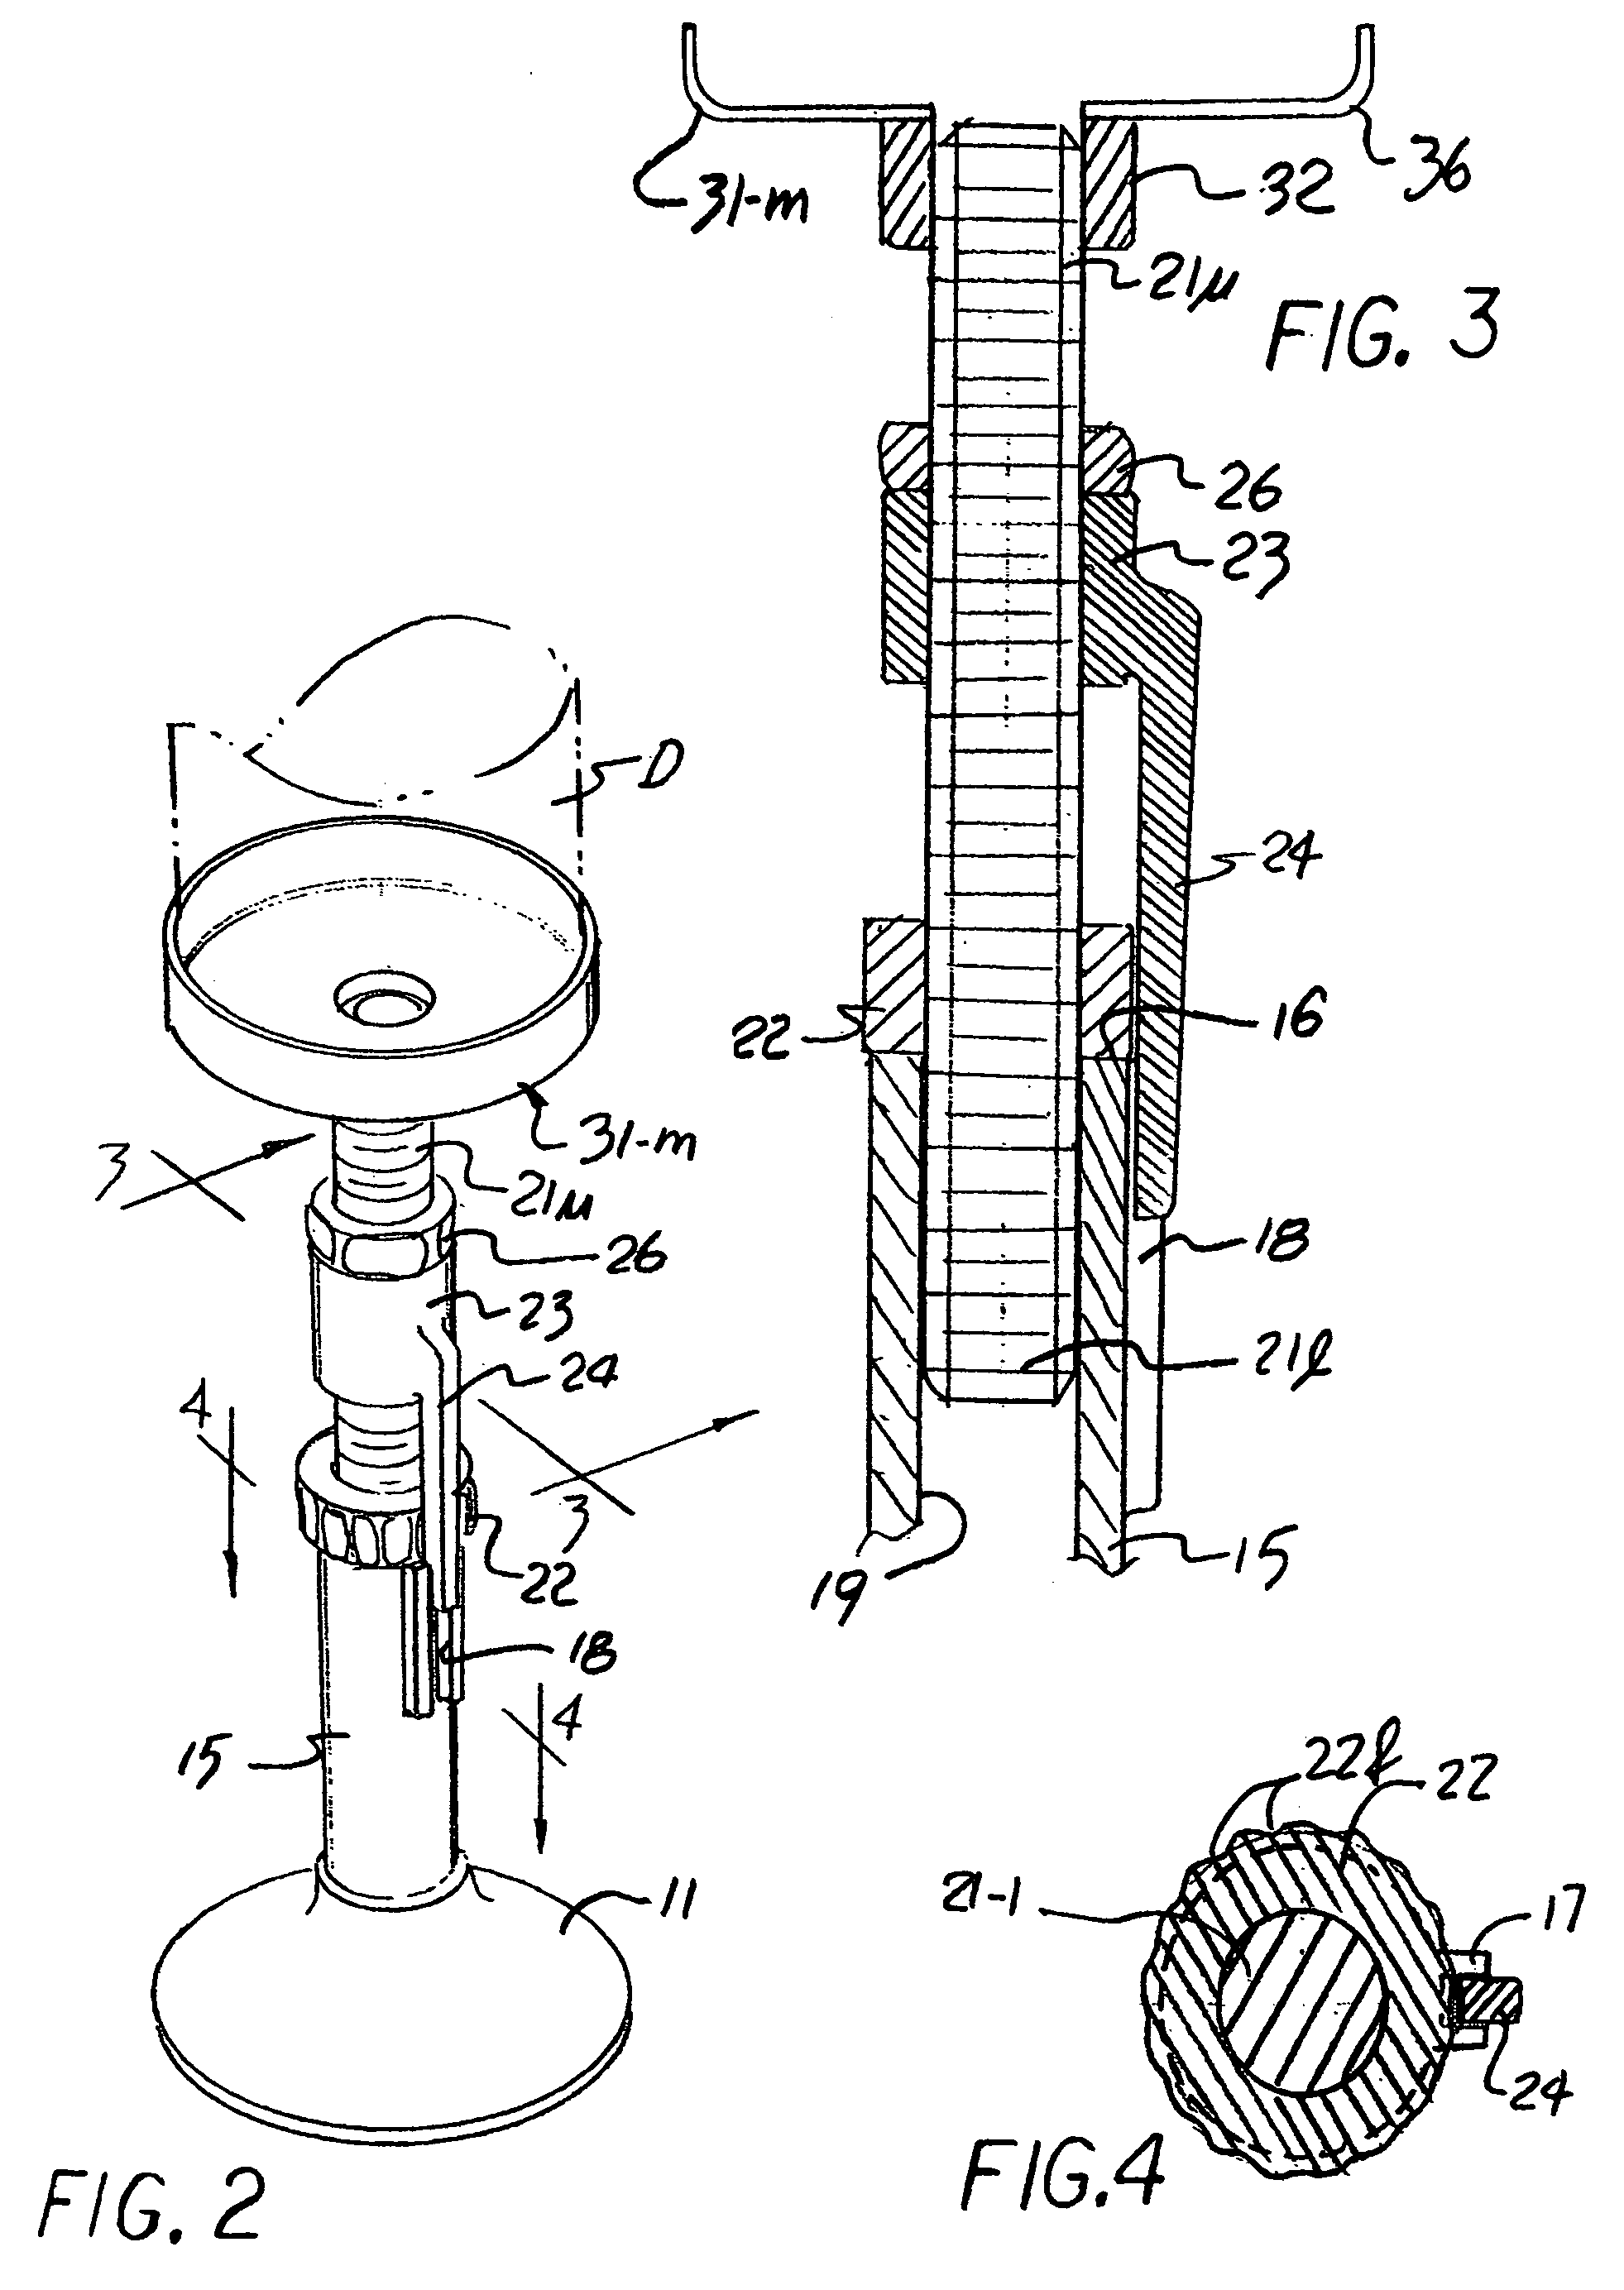 Adjustable support assembly